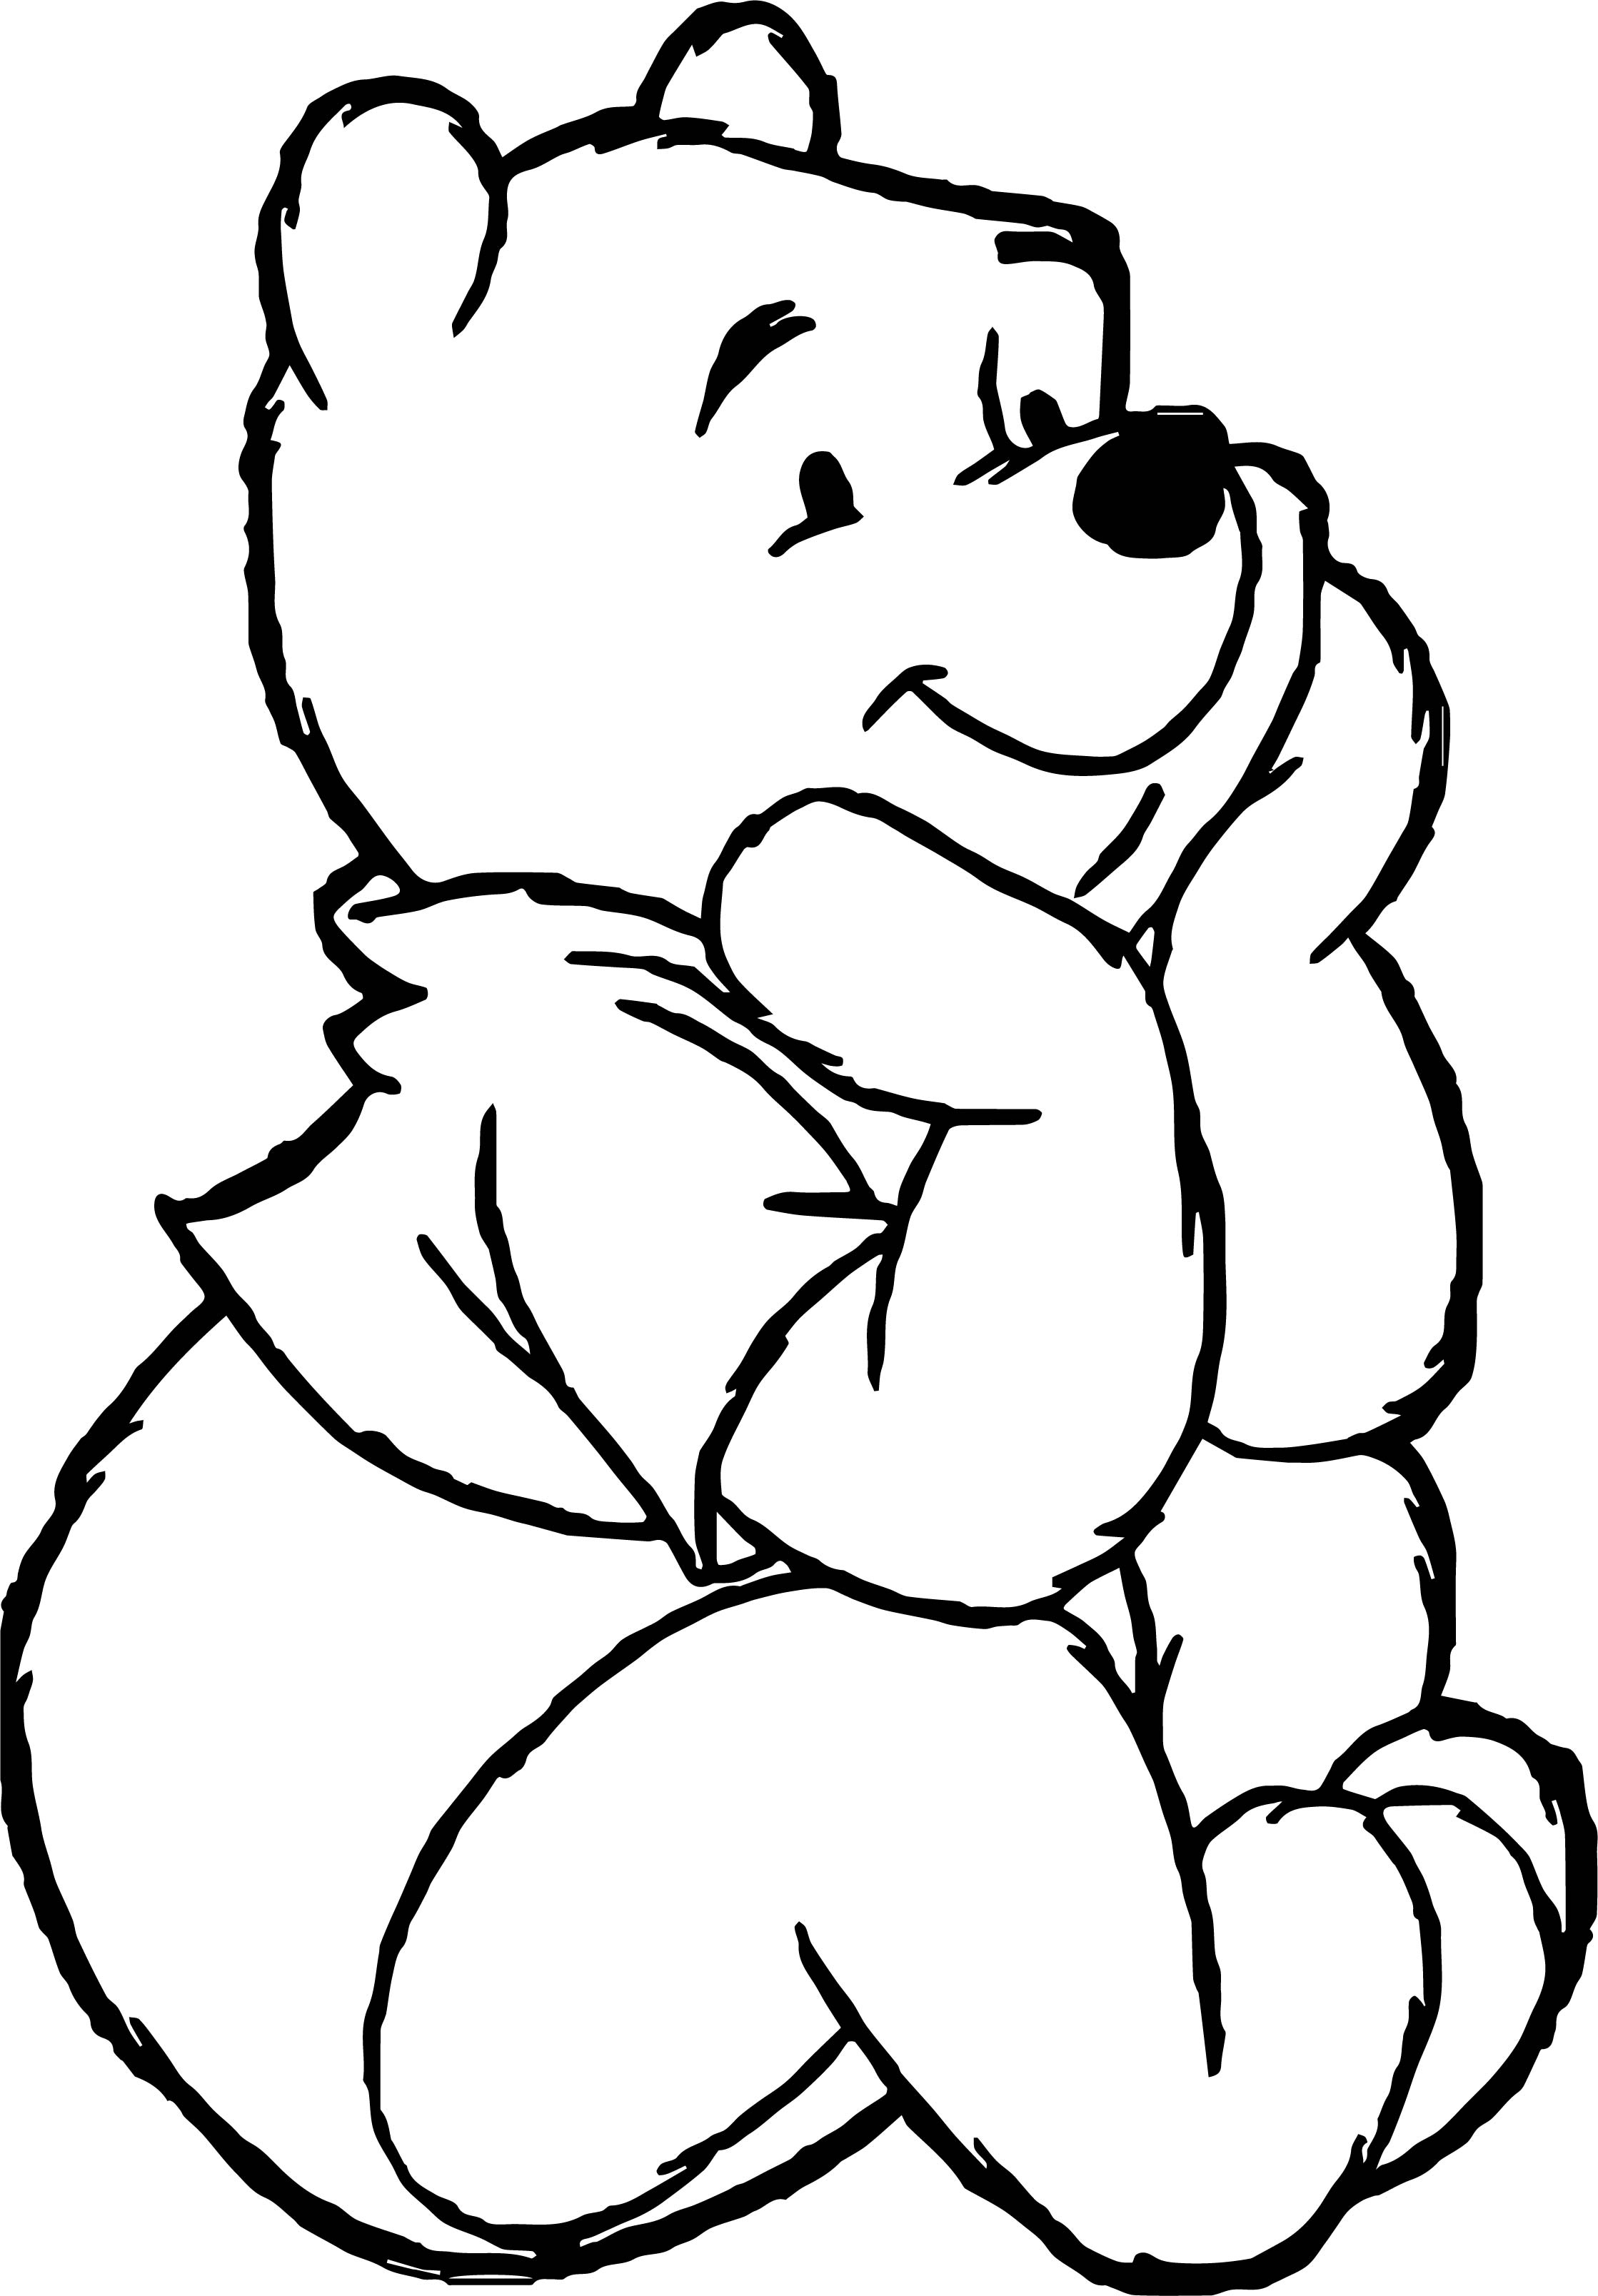 Winnie The Pooh Coloring Pages Online Winnie Pooh Happy Fly Coloring Page The Think Best Free Coloring